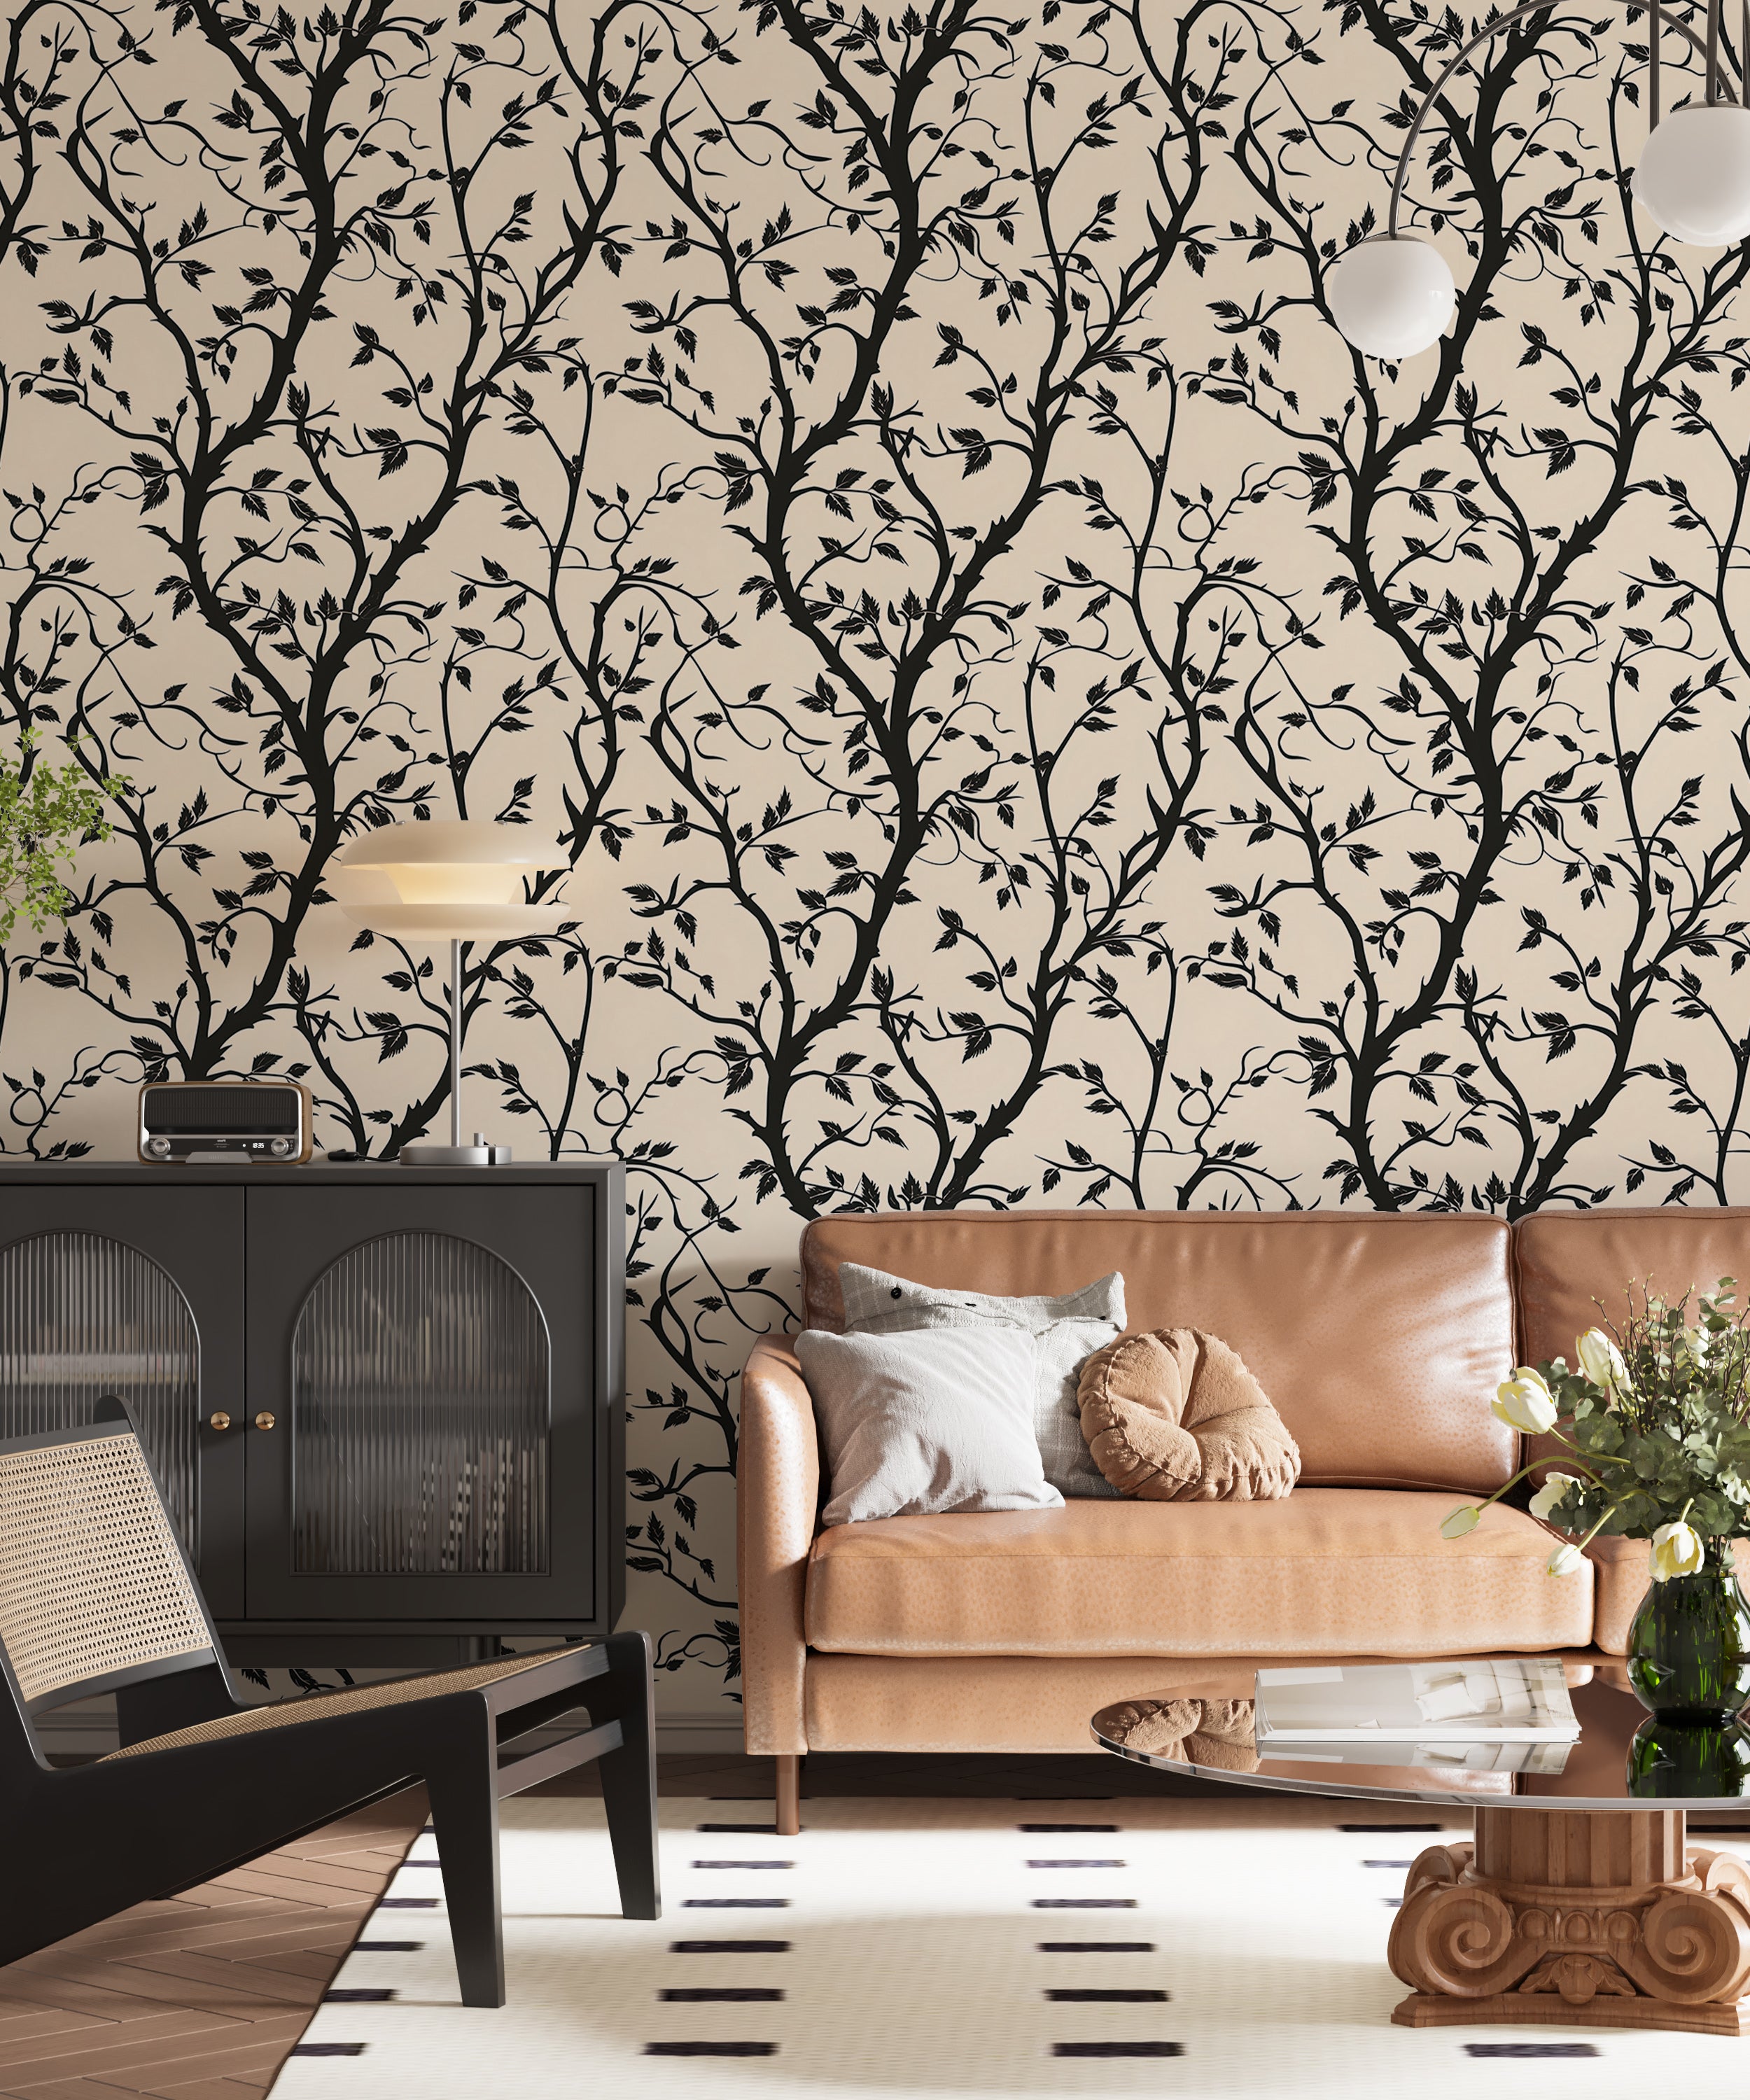 Removable beige and black wallpaper